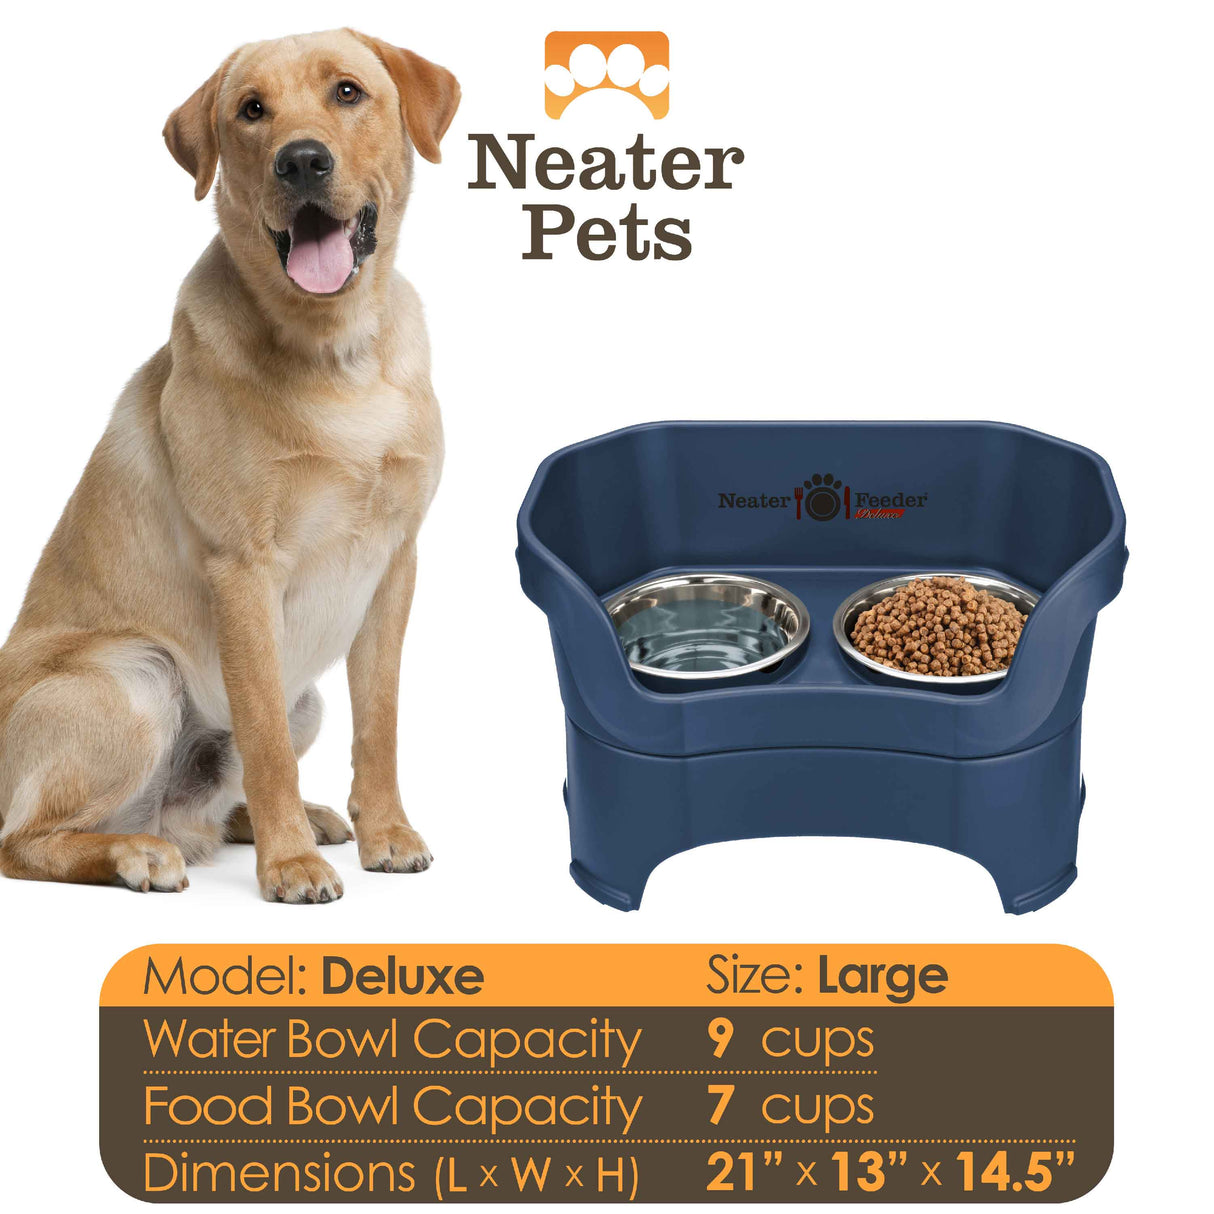 Neater Feeder Deluxe Large Dark Blue bowl capacities